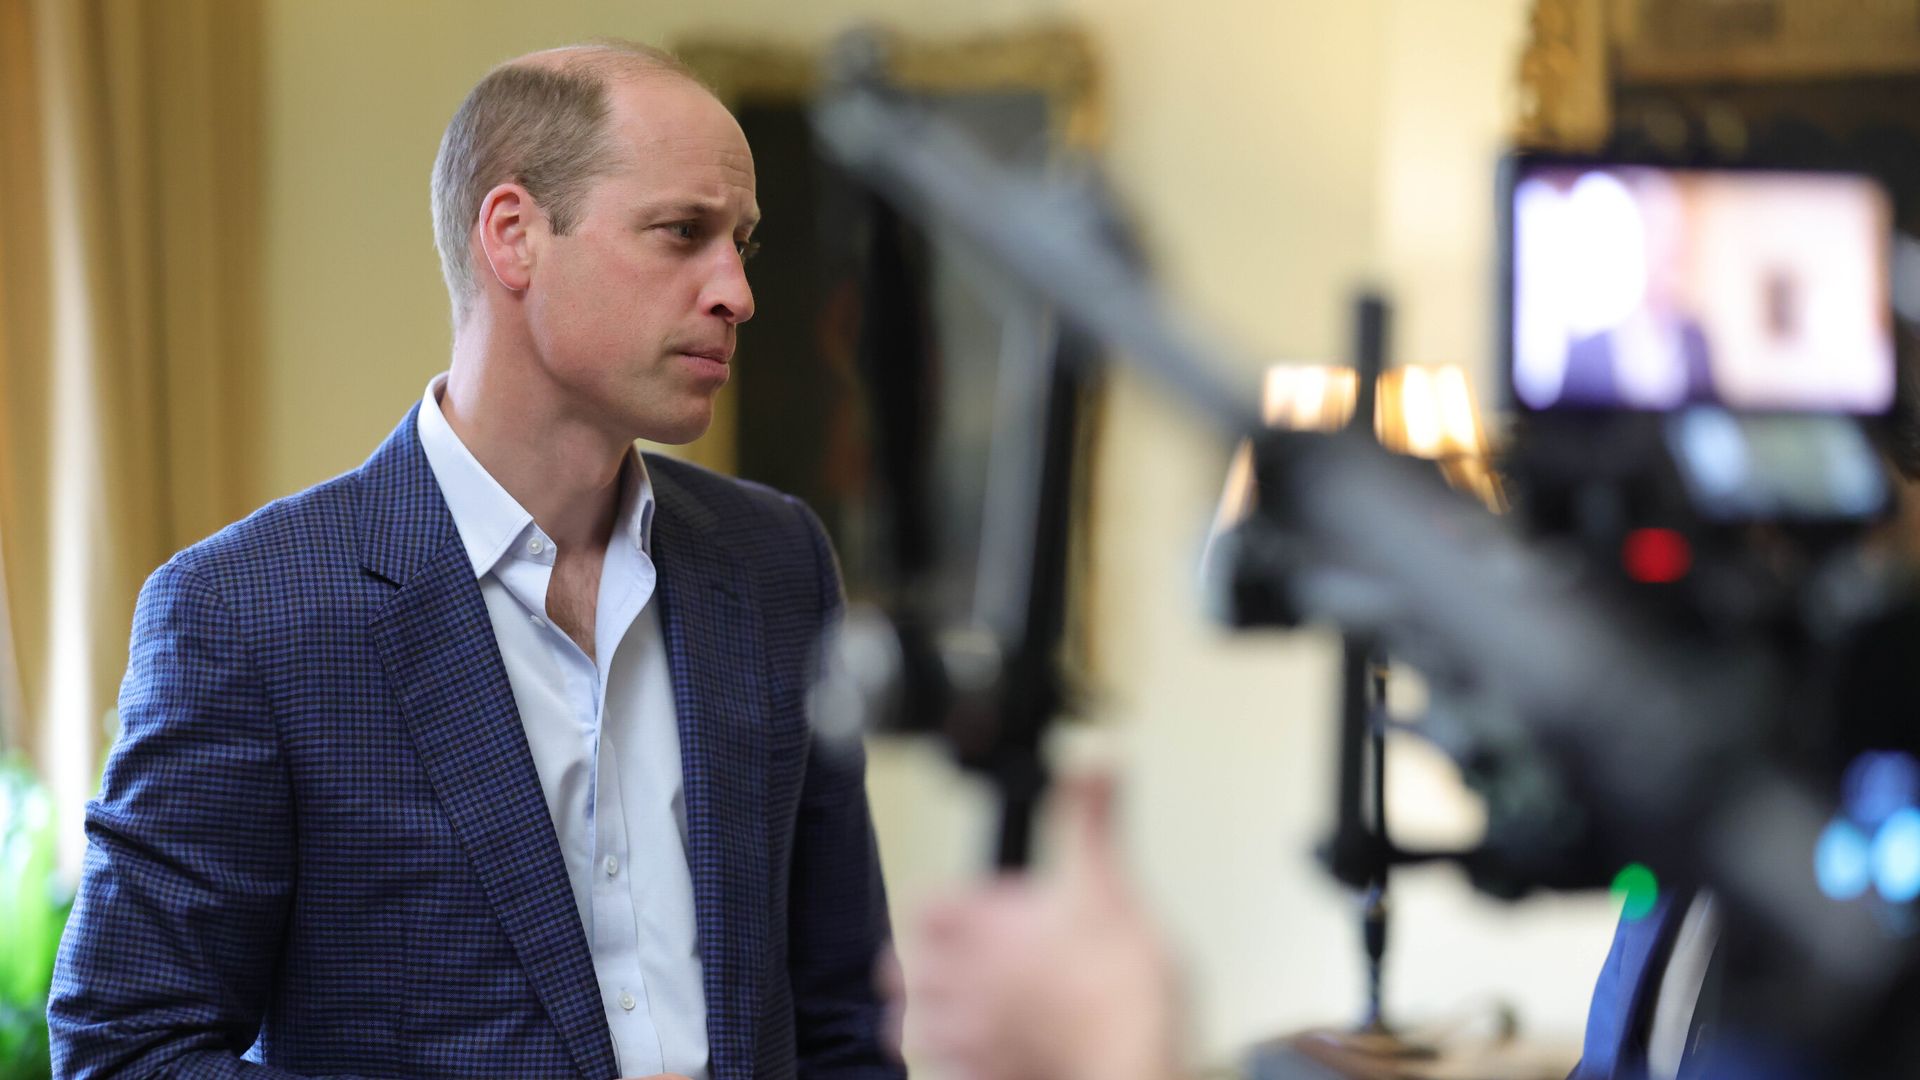 Prince William's homelessness project to be focus of new documentary